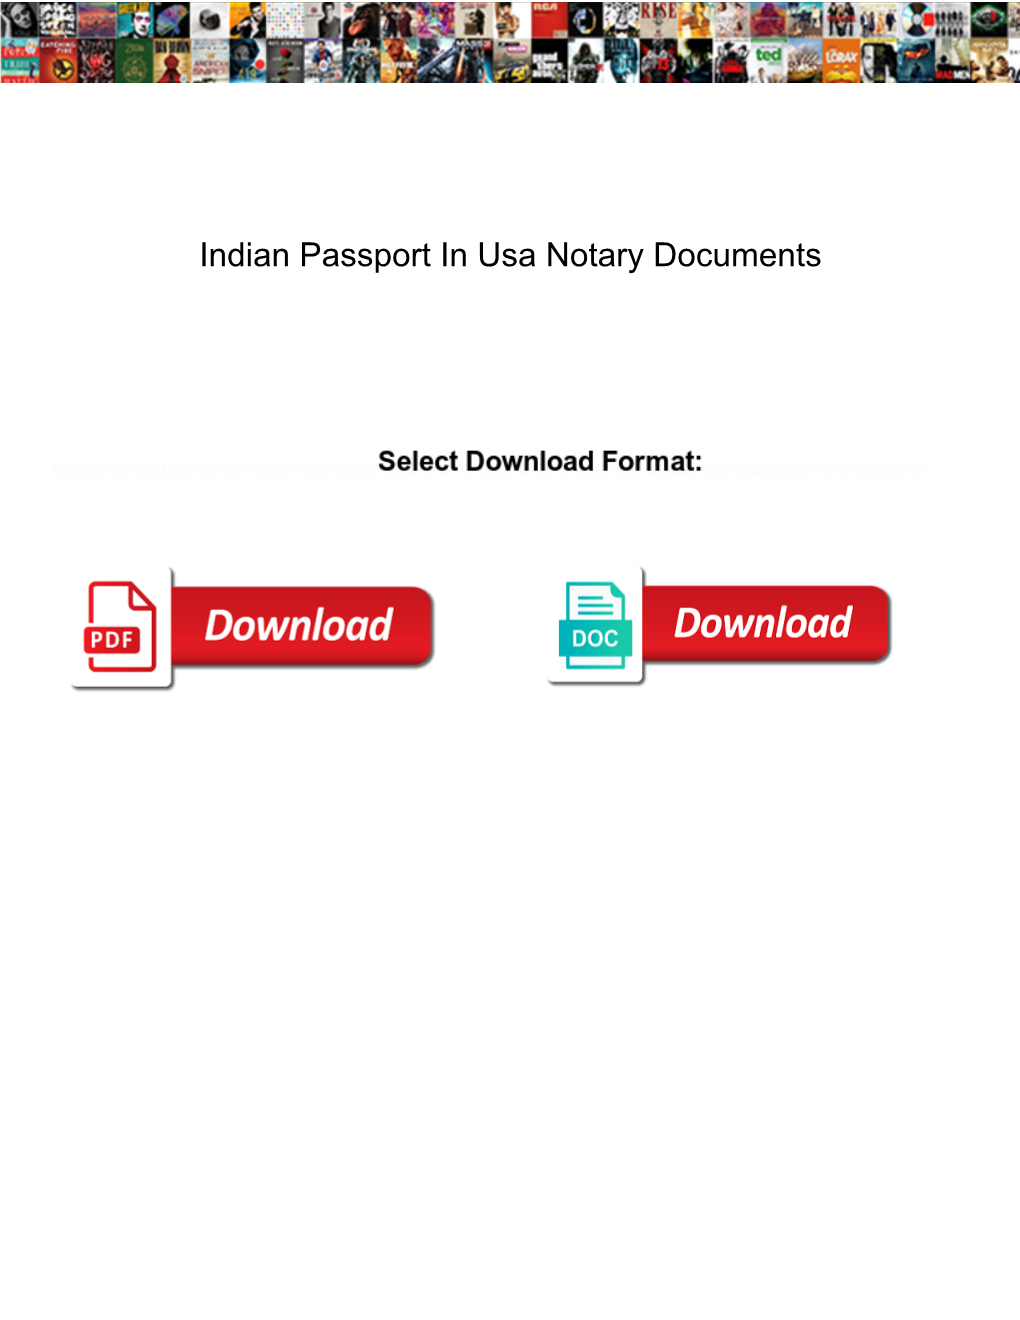 Indian Passport in Usa Notary Documents